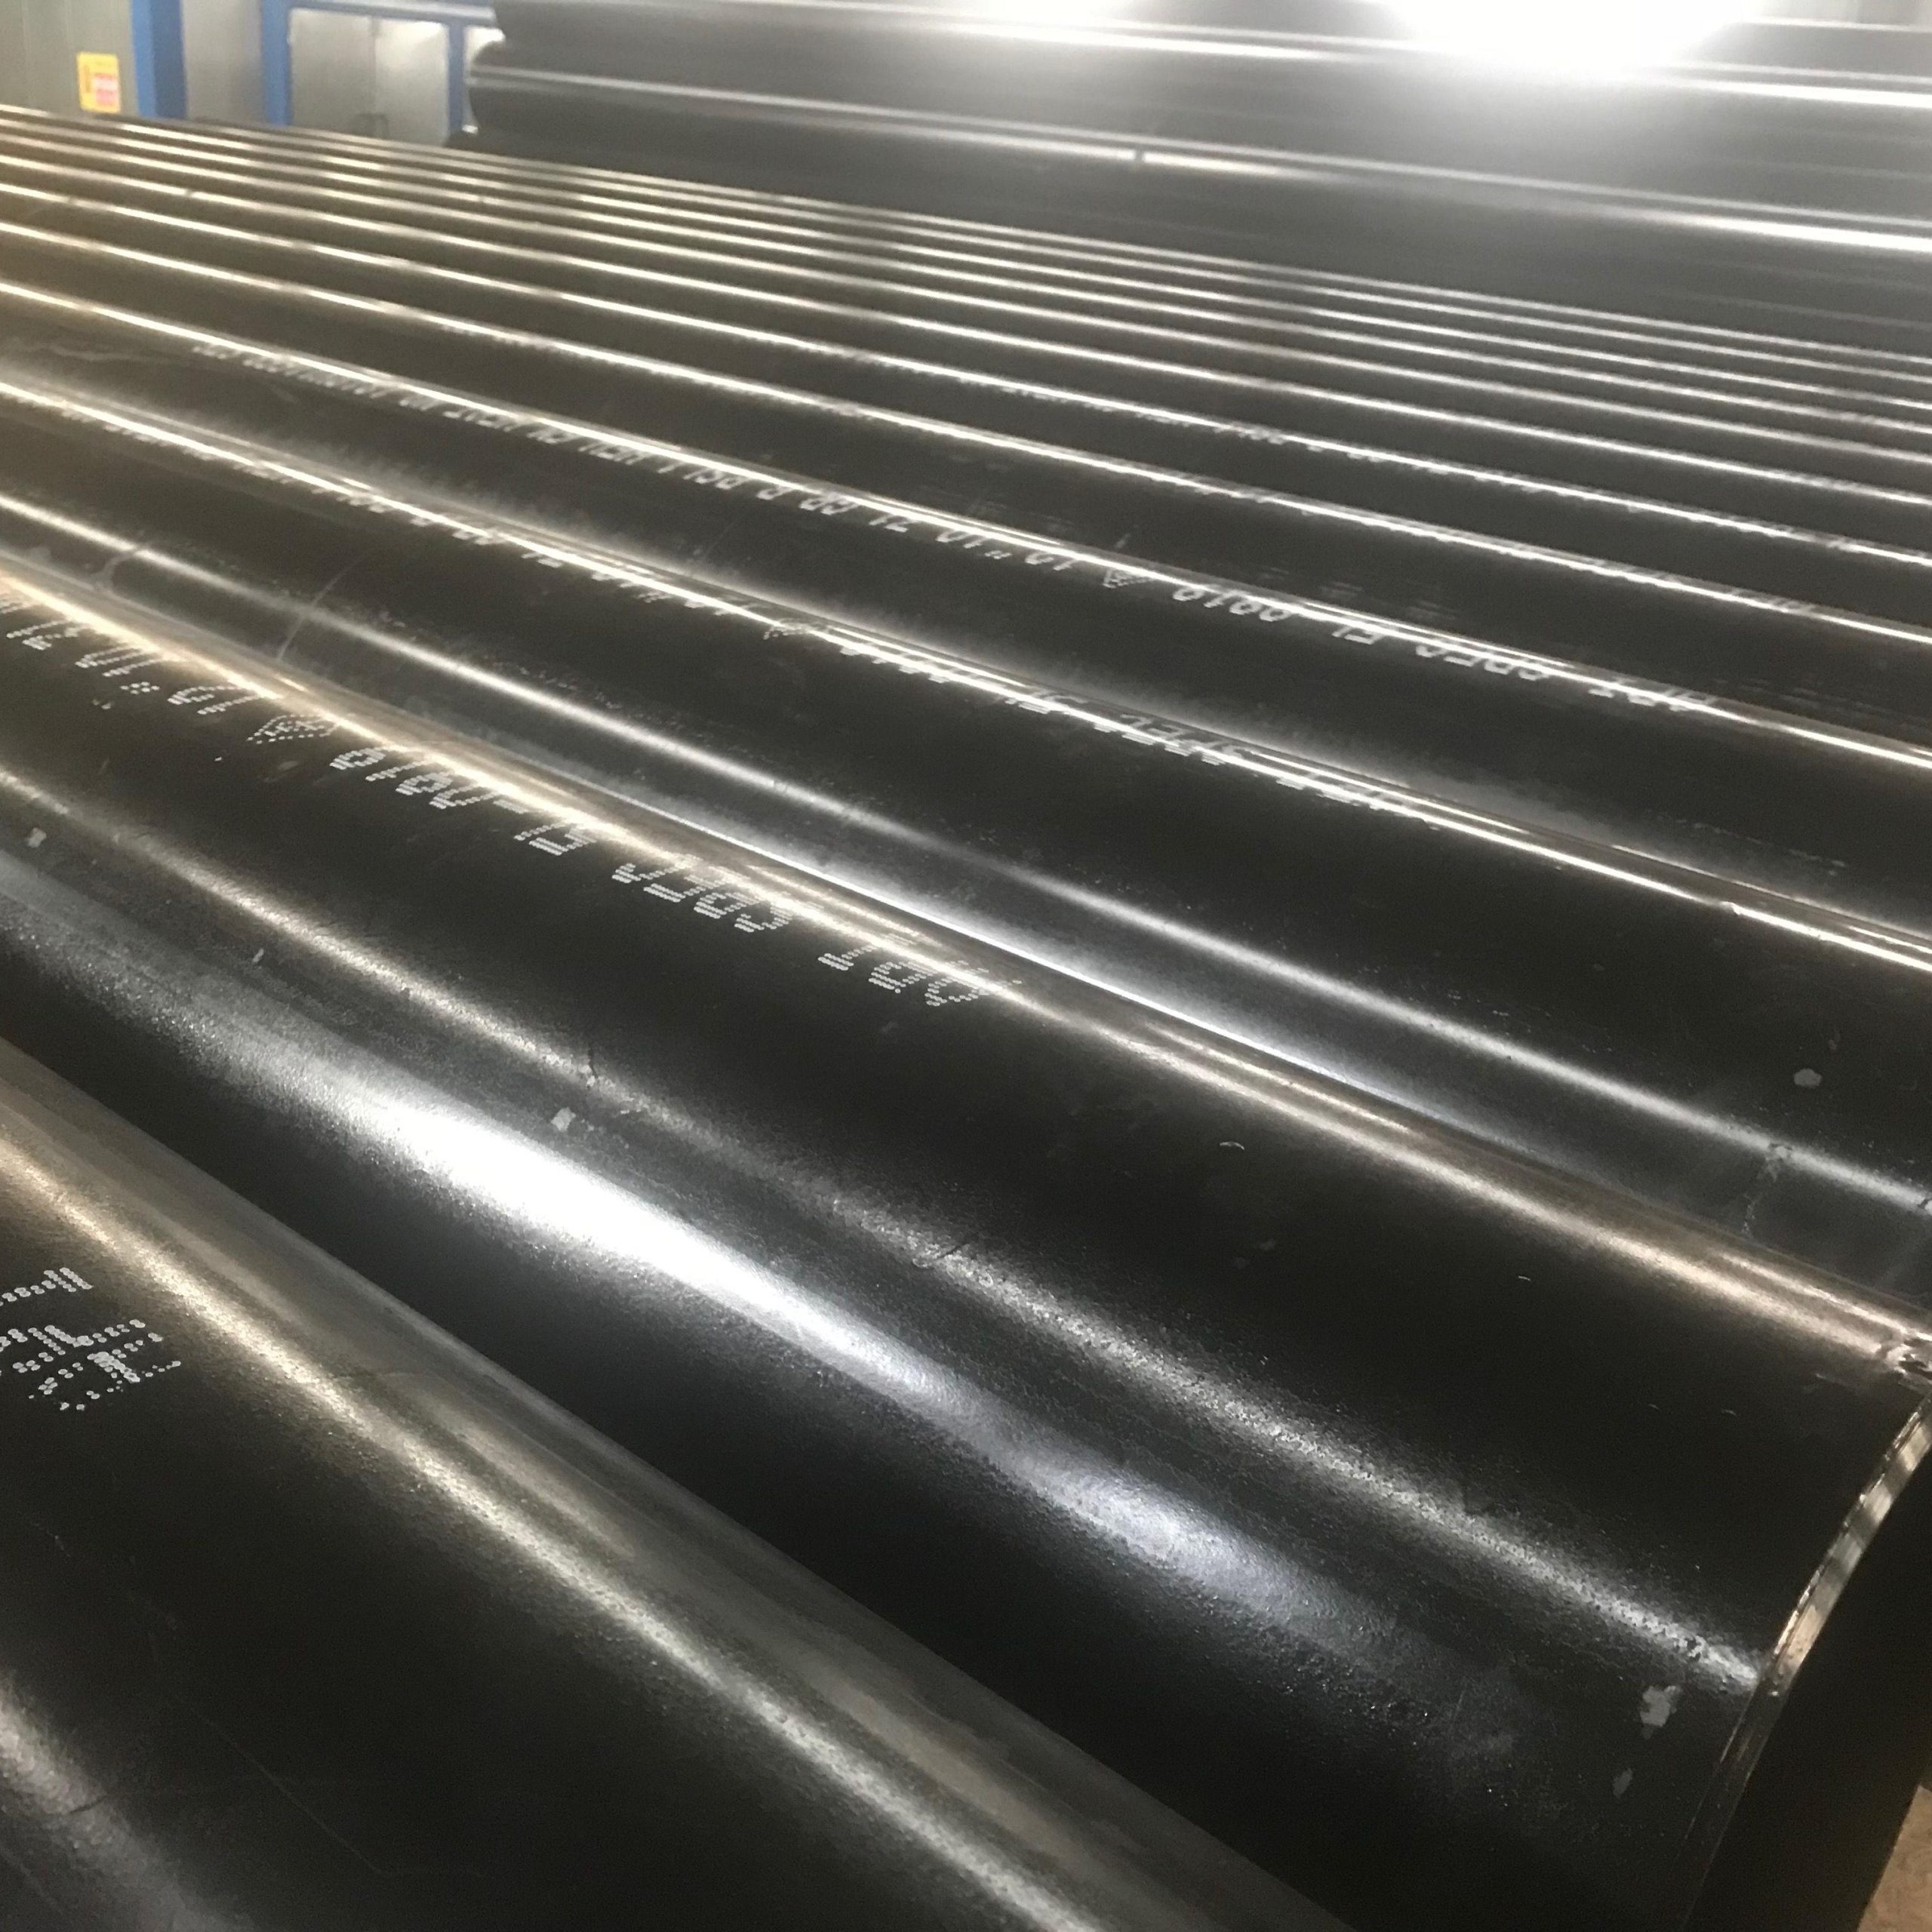 DIFFERENCE BETWEEN SEAMLESS AND ERW STAINLESS STEEL PIPE